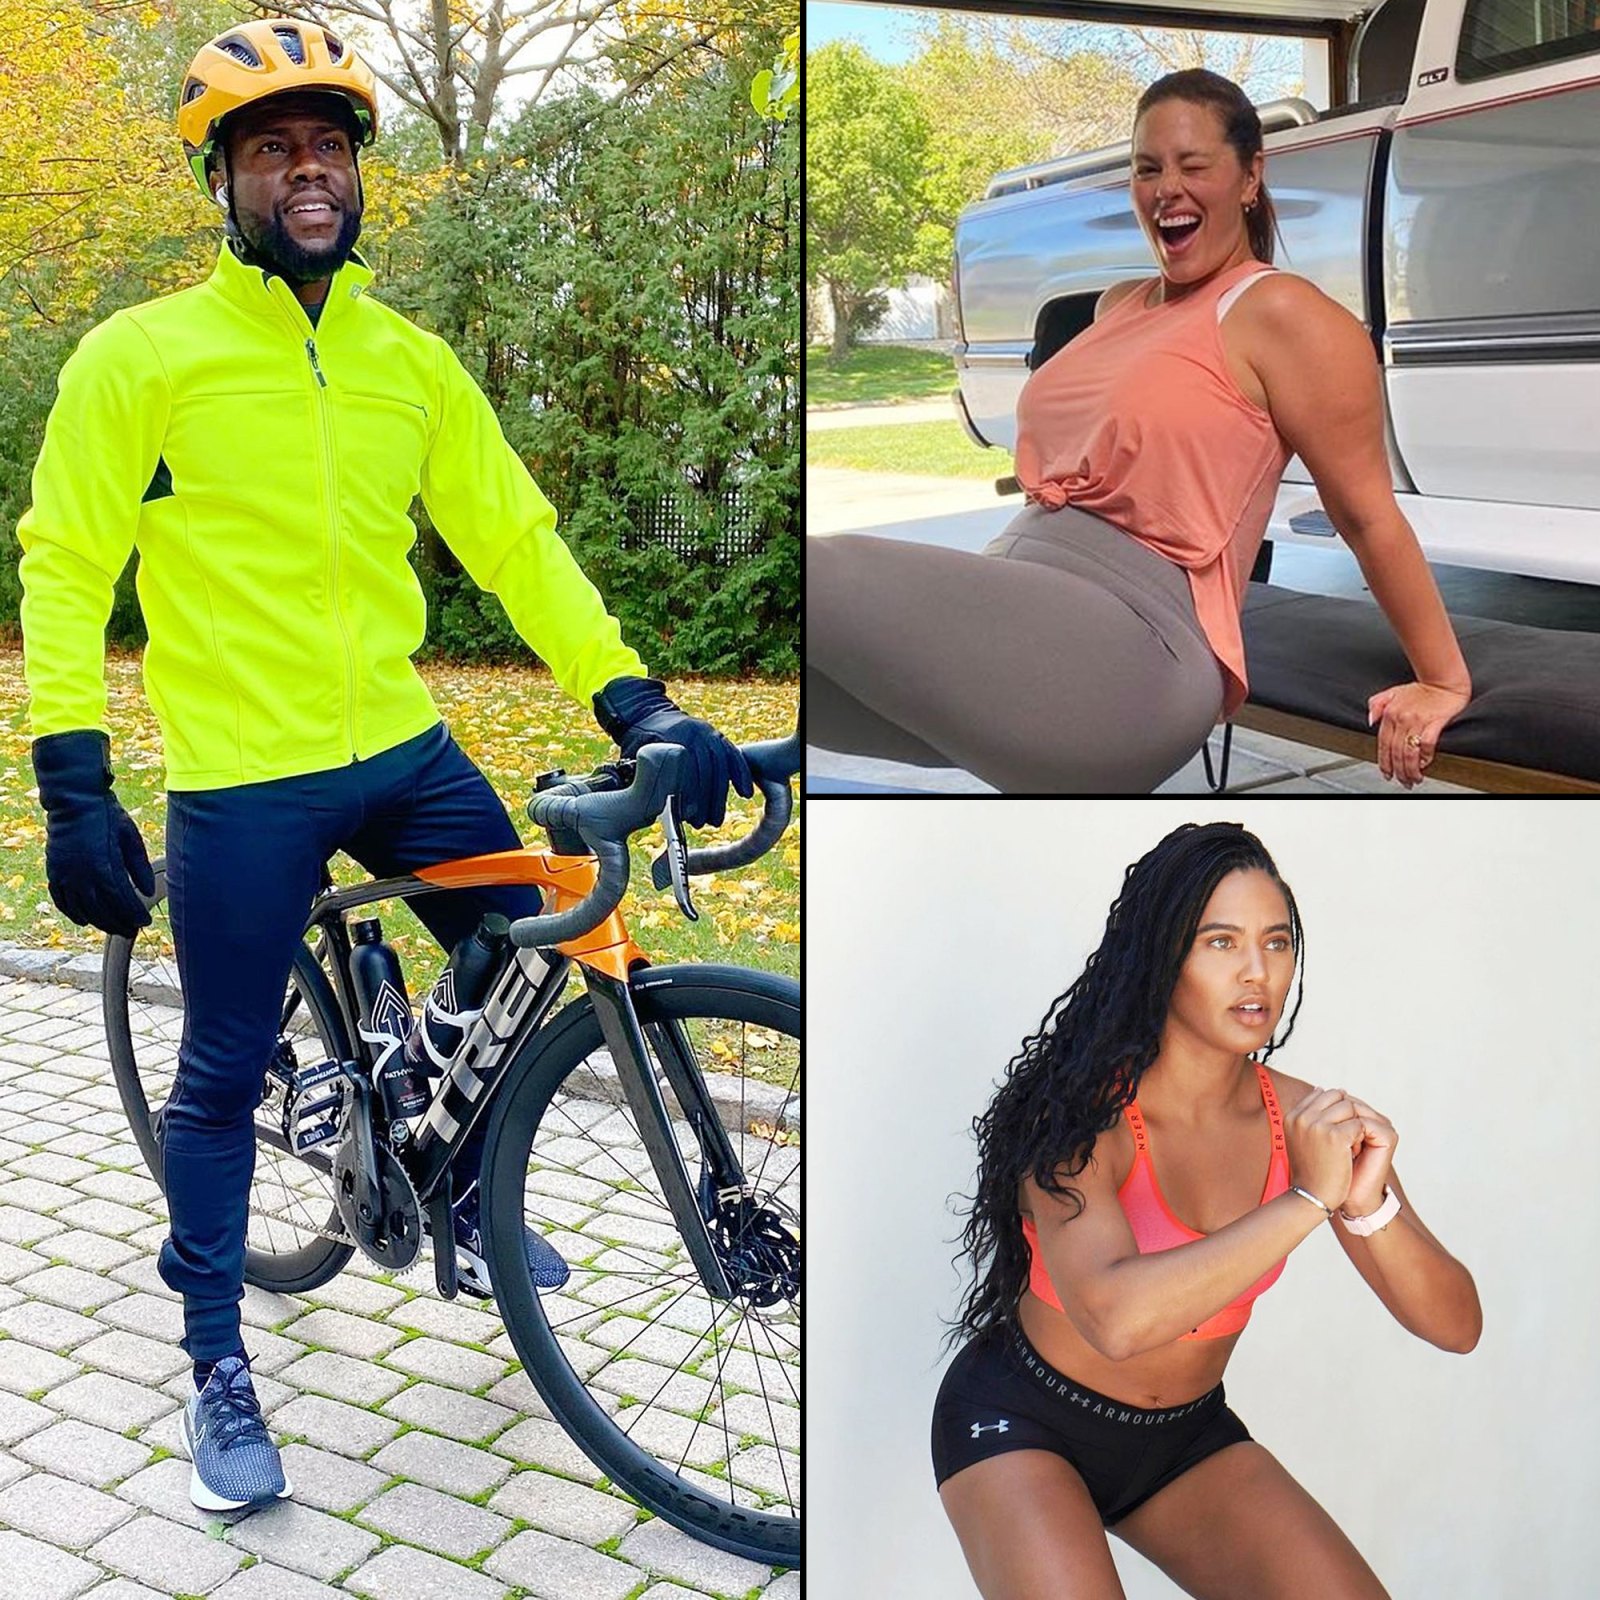 Kevin Hart Ashley Graham and Ayesha Curry Stars Share Their Workout Routines Amid Coronavirus